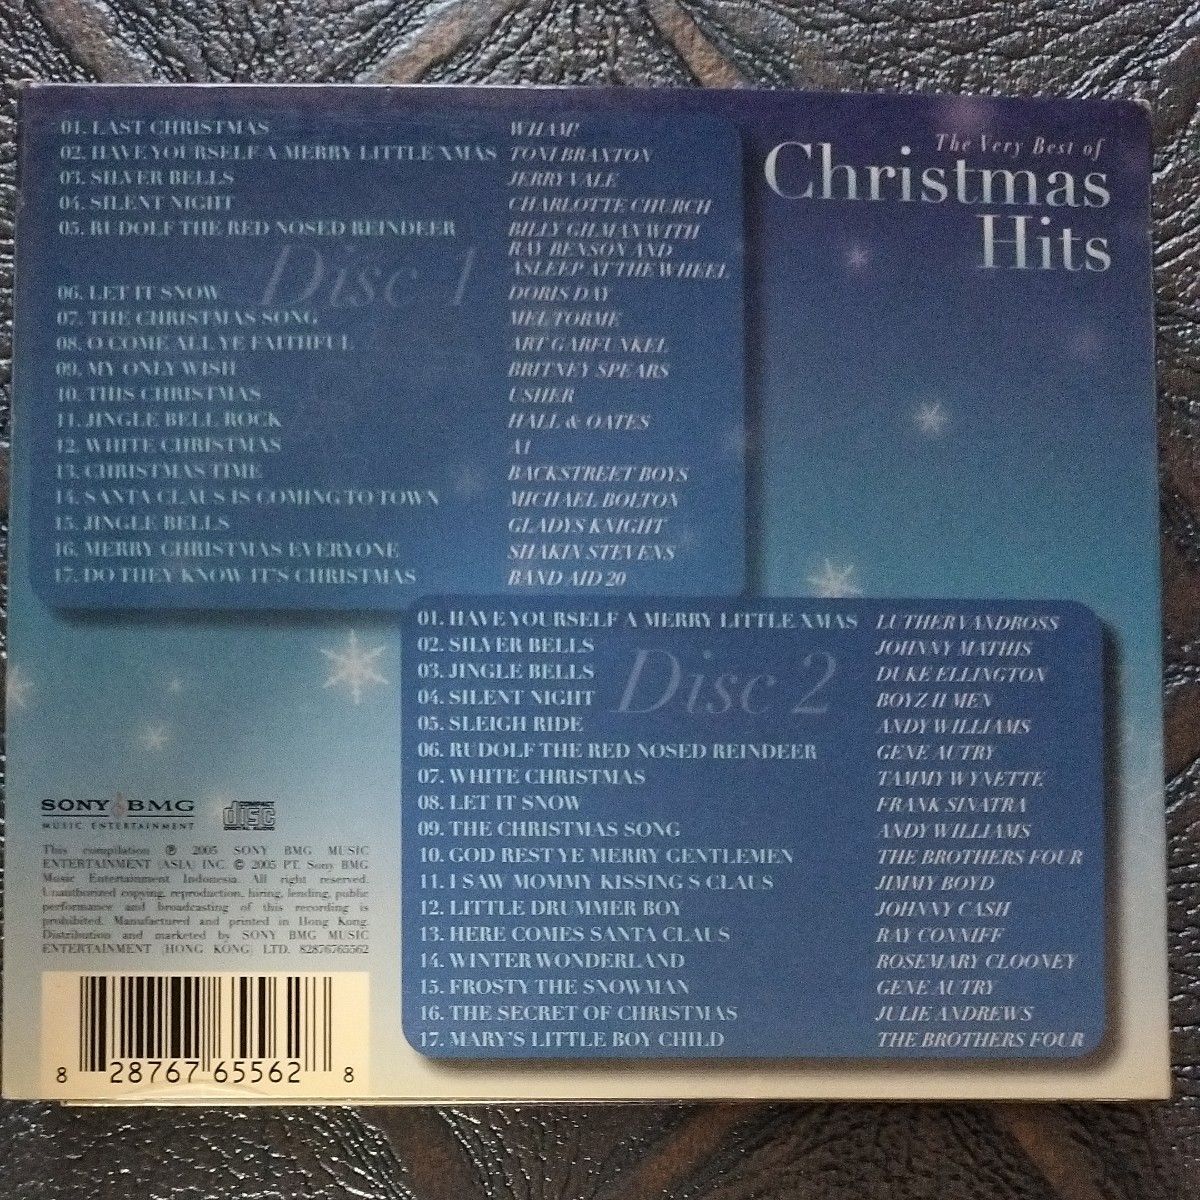 The Very Best Of Christmas Hits / ワム！、ドリス・デイ、他 V.A.【輸入盤２CD】